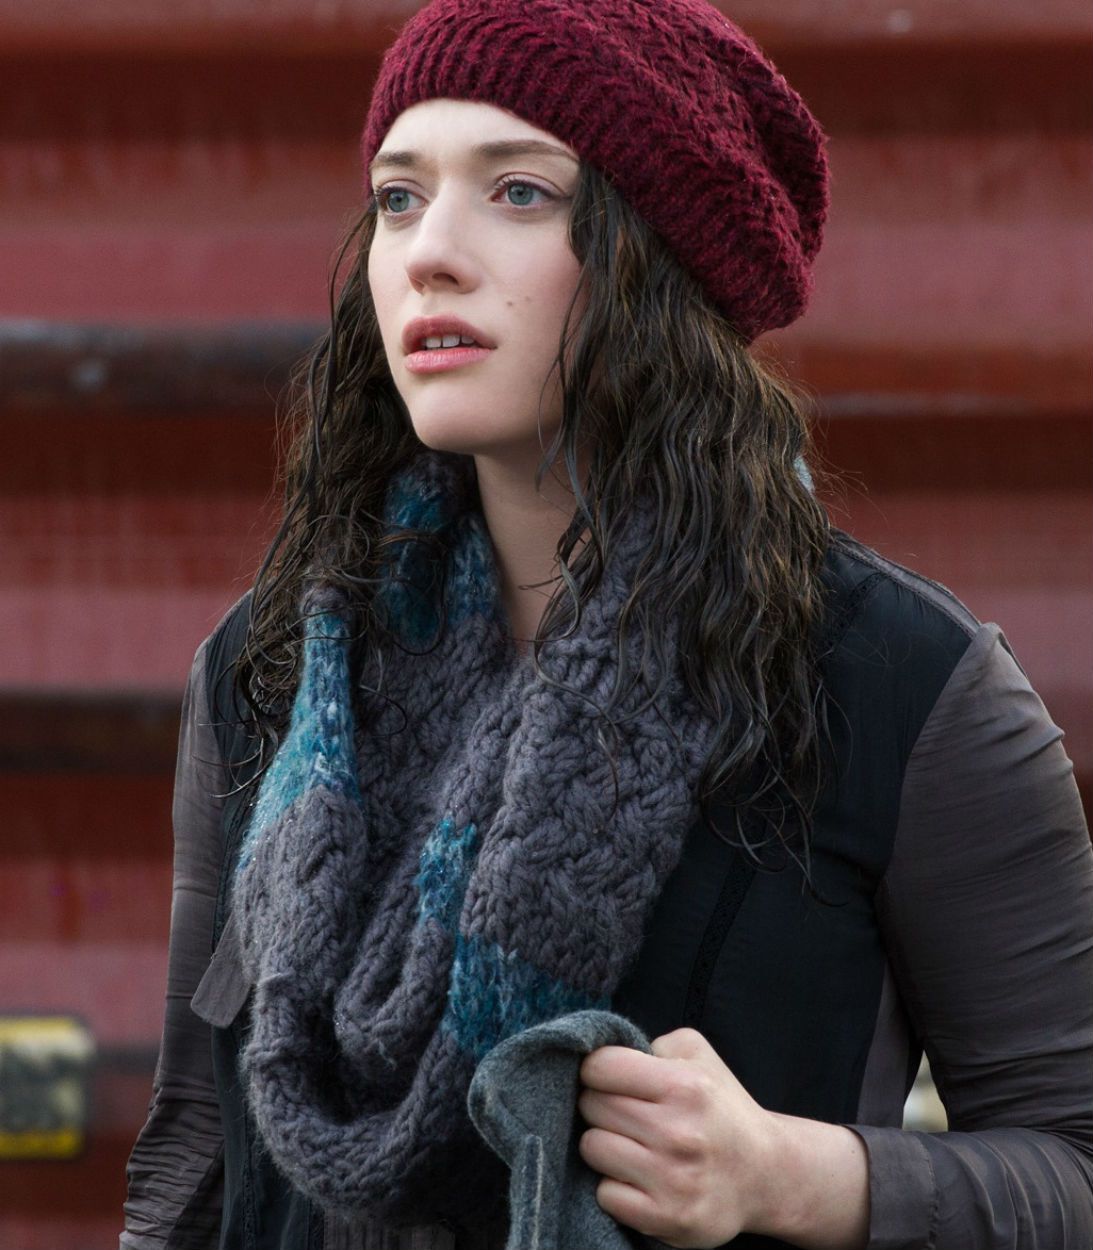 Kat Dennings as Darcy in Thor the Dark World Vertical